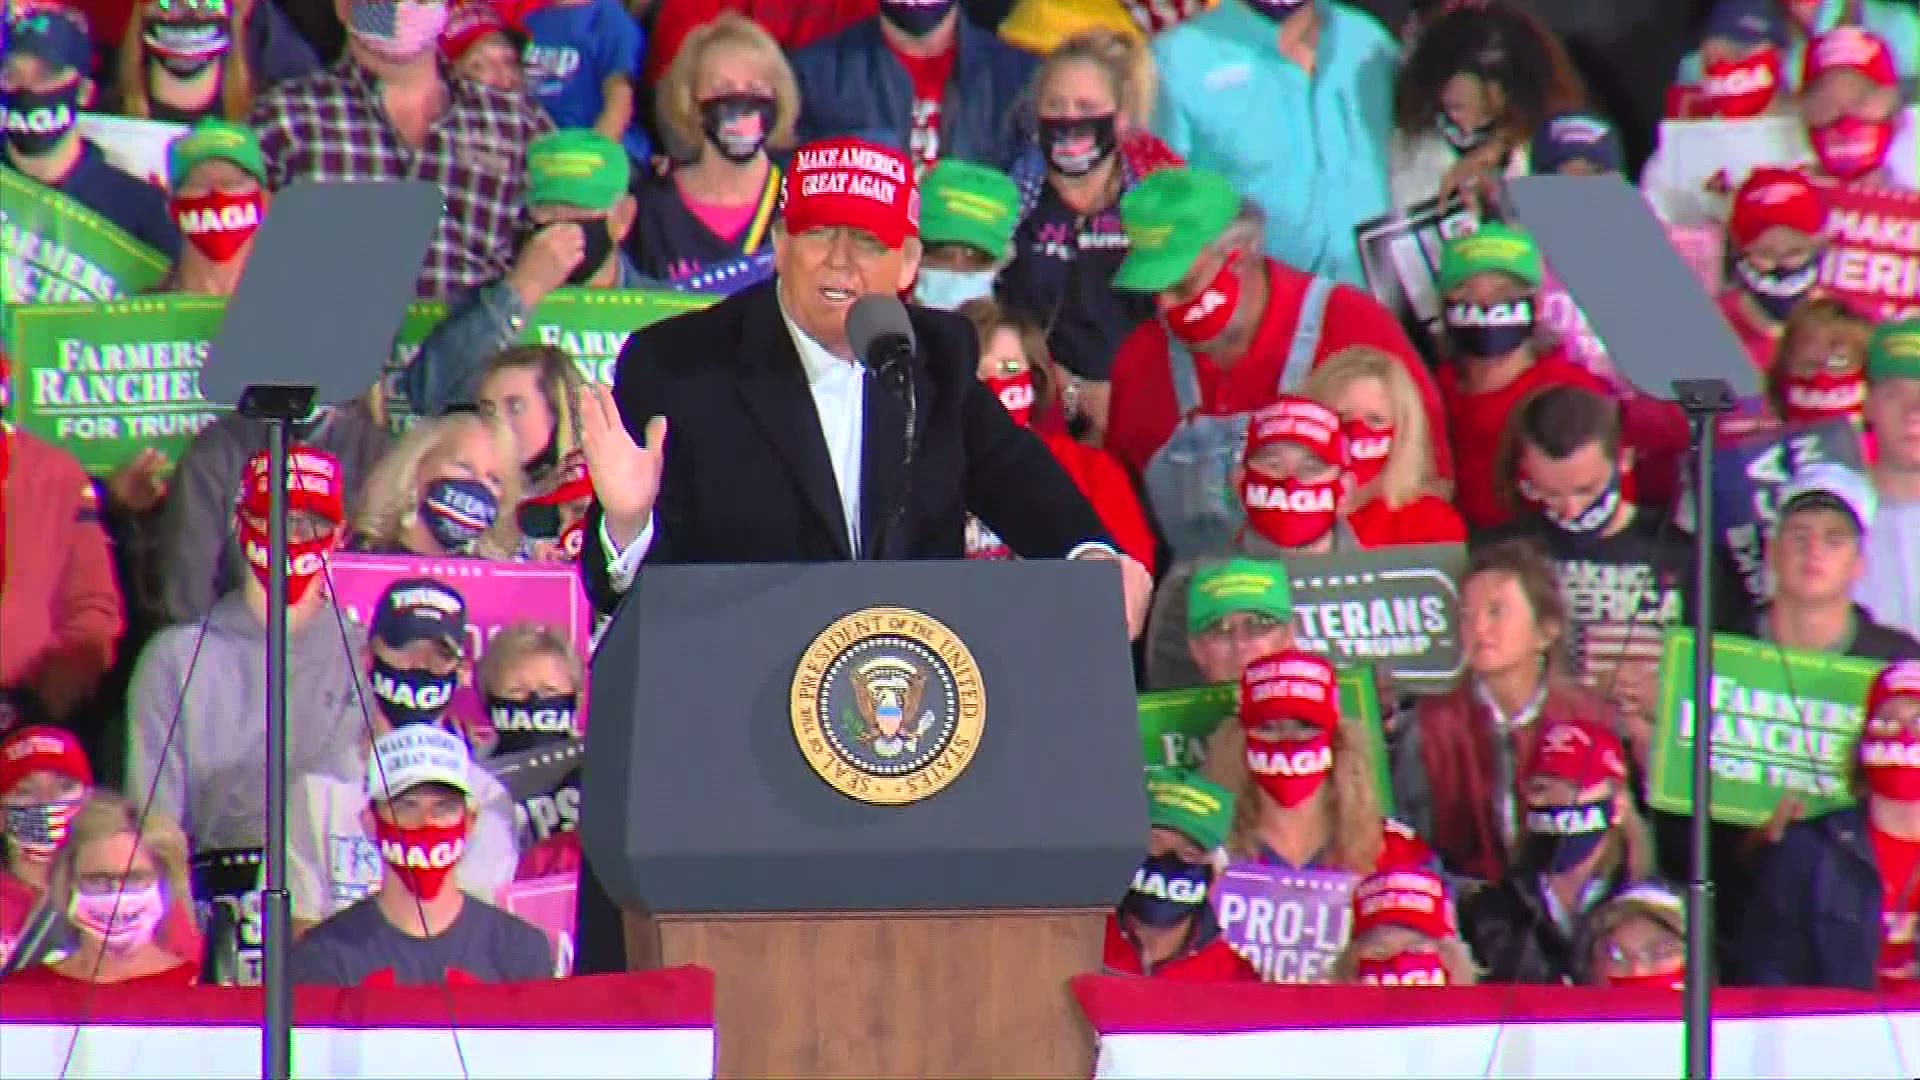 President Trump told supporters at a Des Moines rally that states should open up amid the COVID-19 pandemic to help the U.S. recover financially.